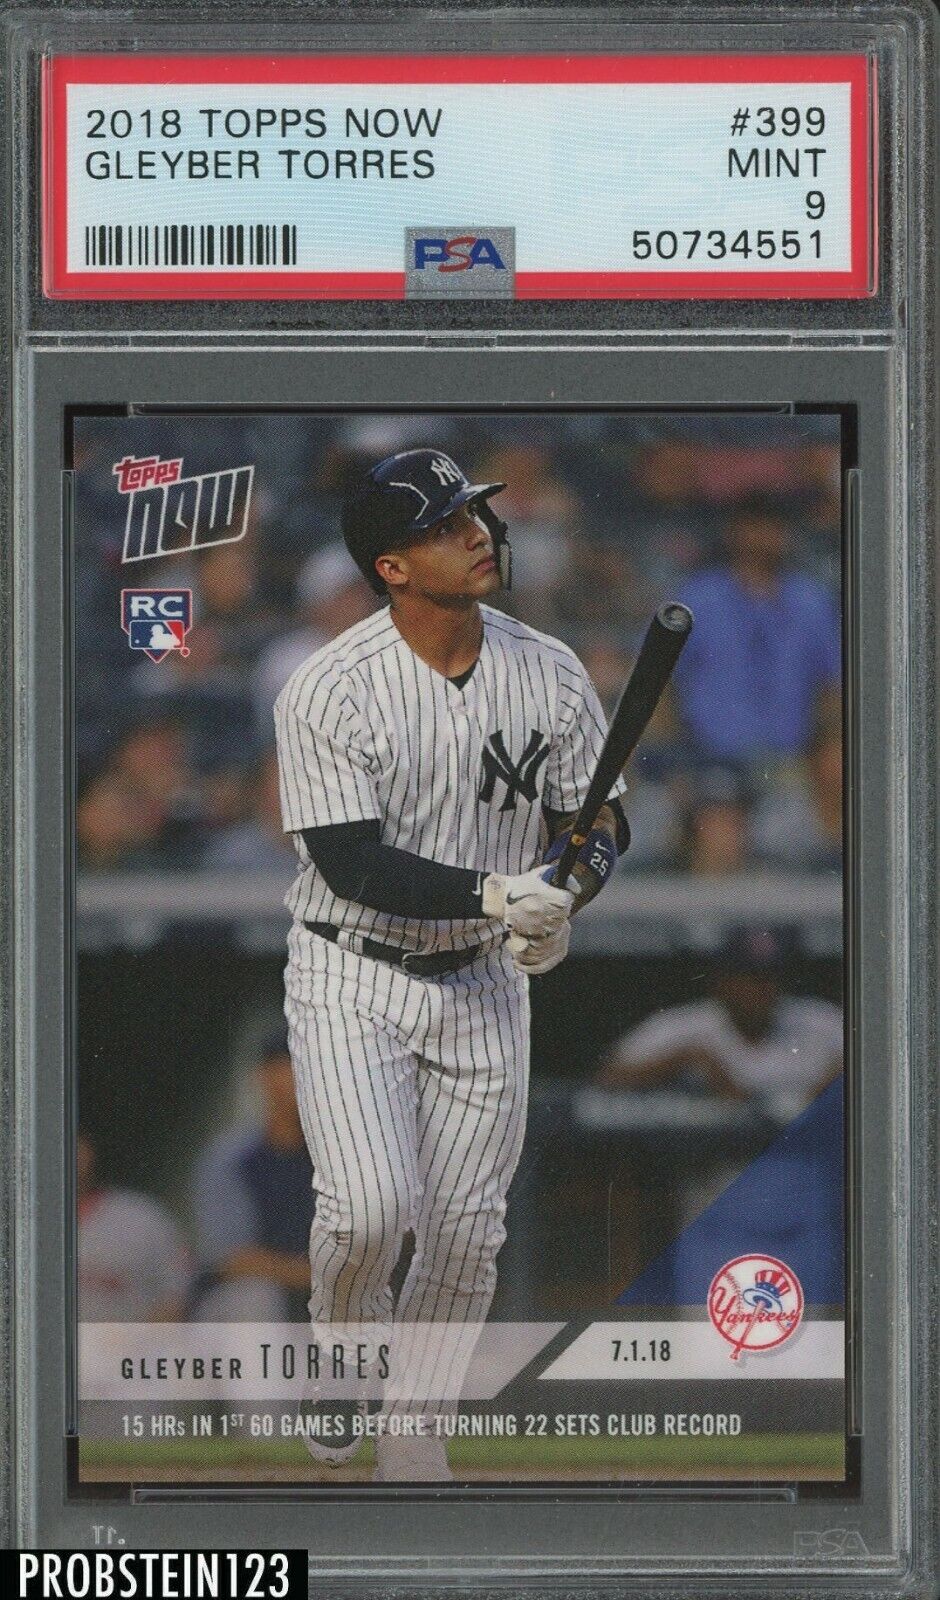 2018 Topps Now #399 Gleyber Torres New York Yankees RC Rookie PSA 9 MINT